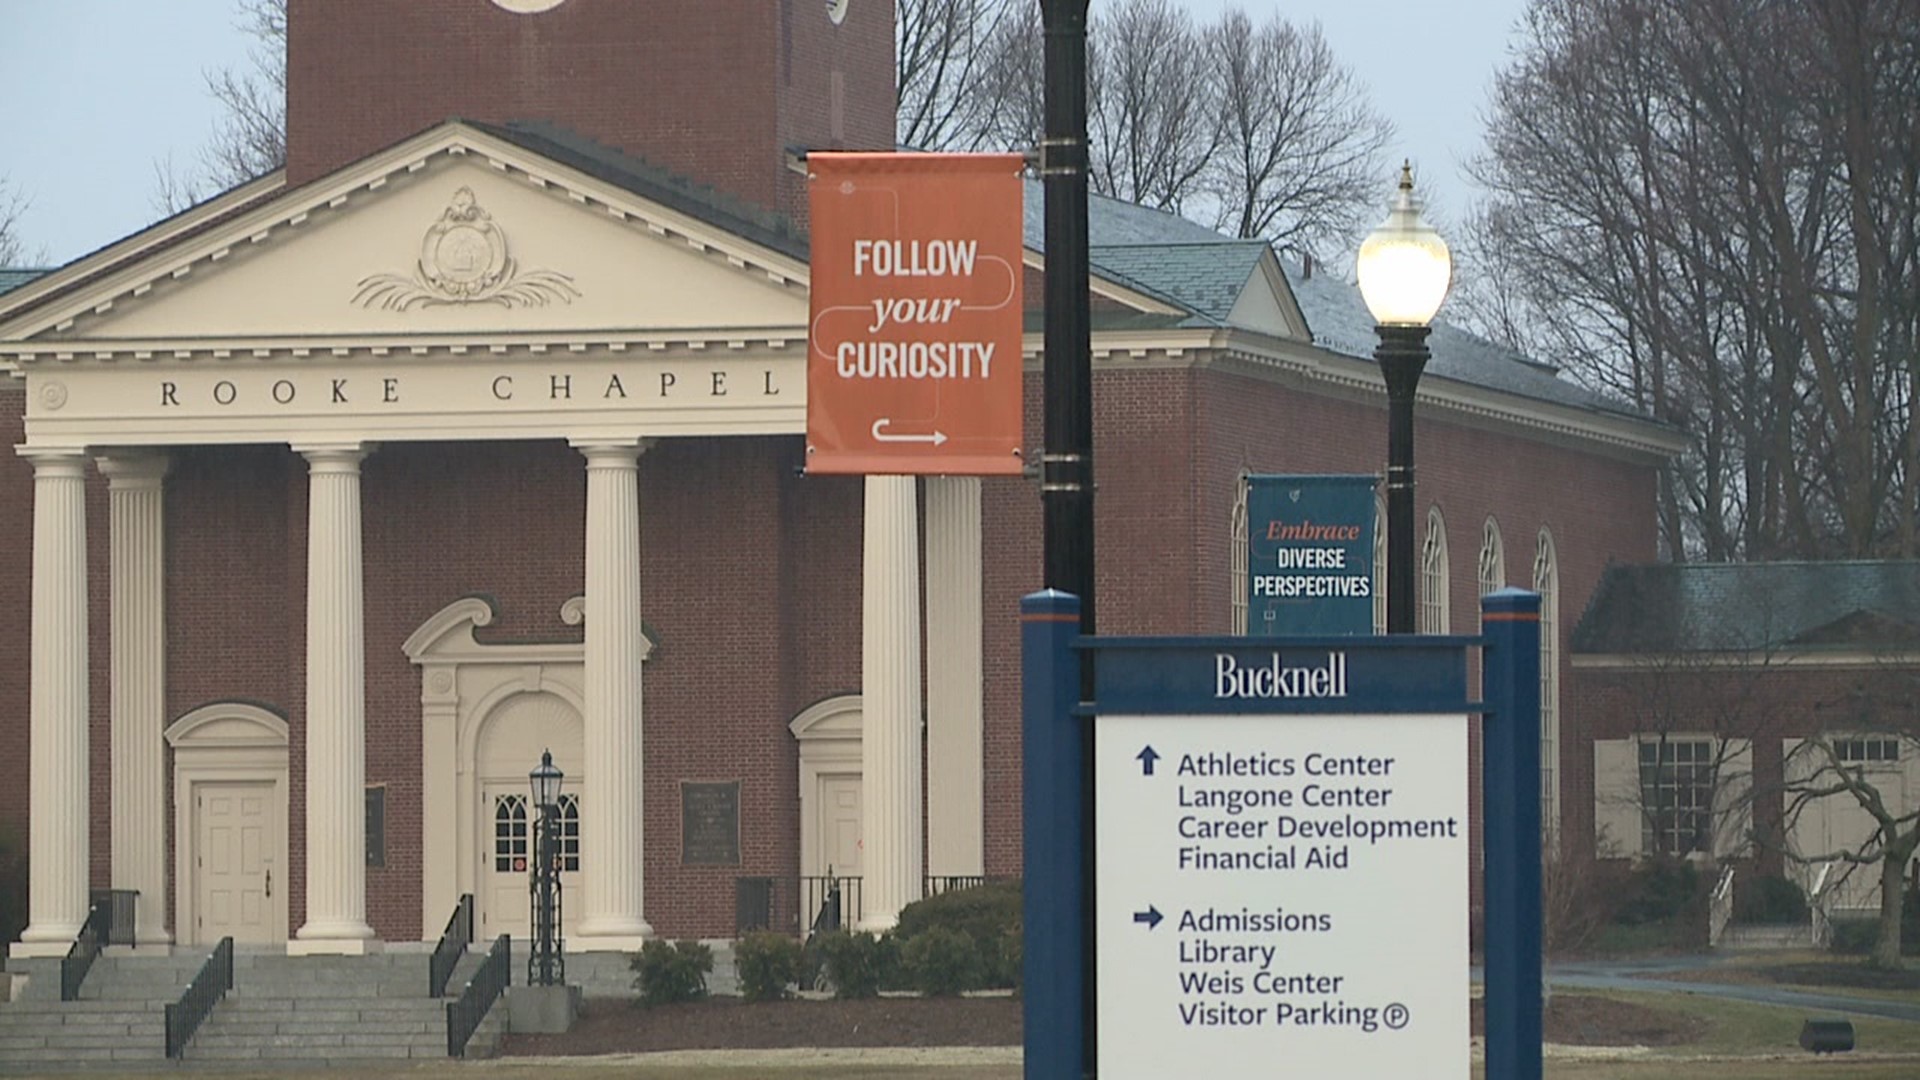 One year of COVID: Looking back on changes at Bucknell University